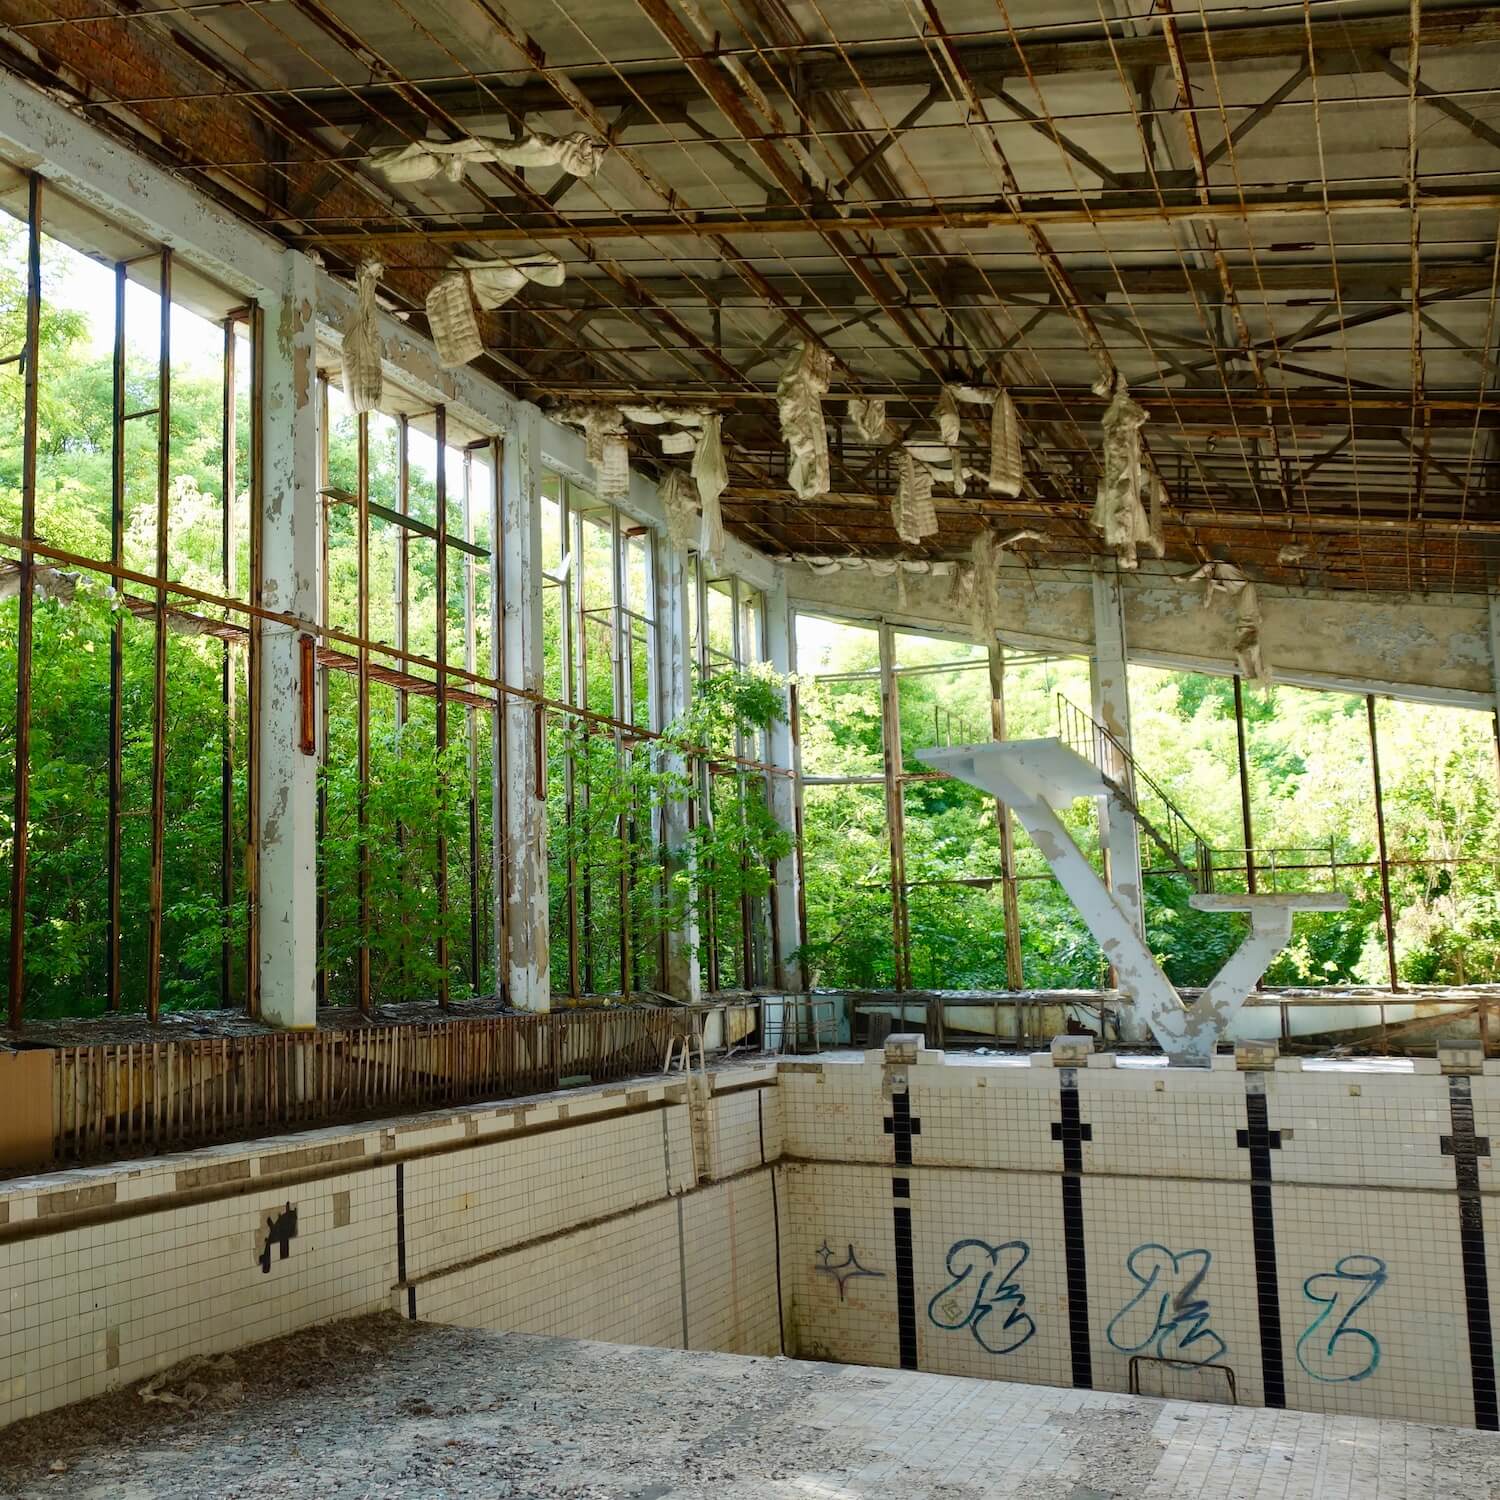 Empty swimming pool in the aquatic complex with all windows broken out and tiles hanging from the ceiling in the ghost town of Prypyat, which was abandoned following the April 1986 explosion of Chernobyl Reactor #4